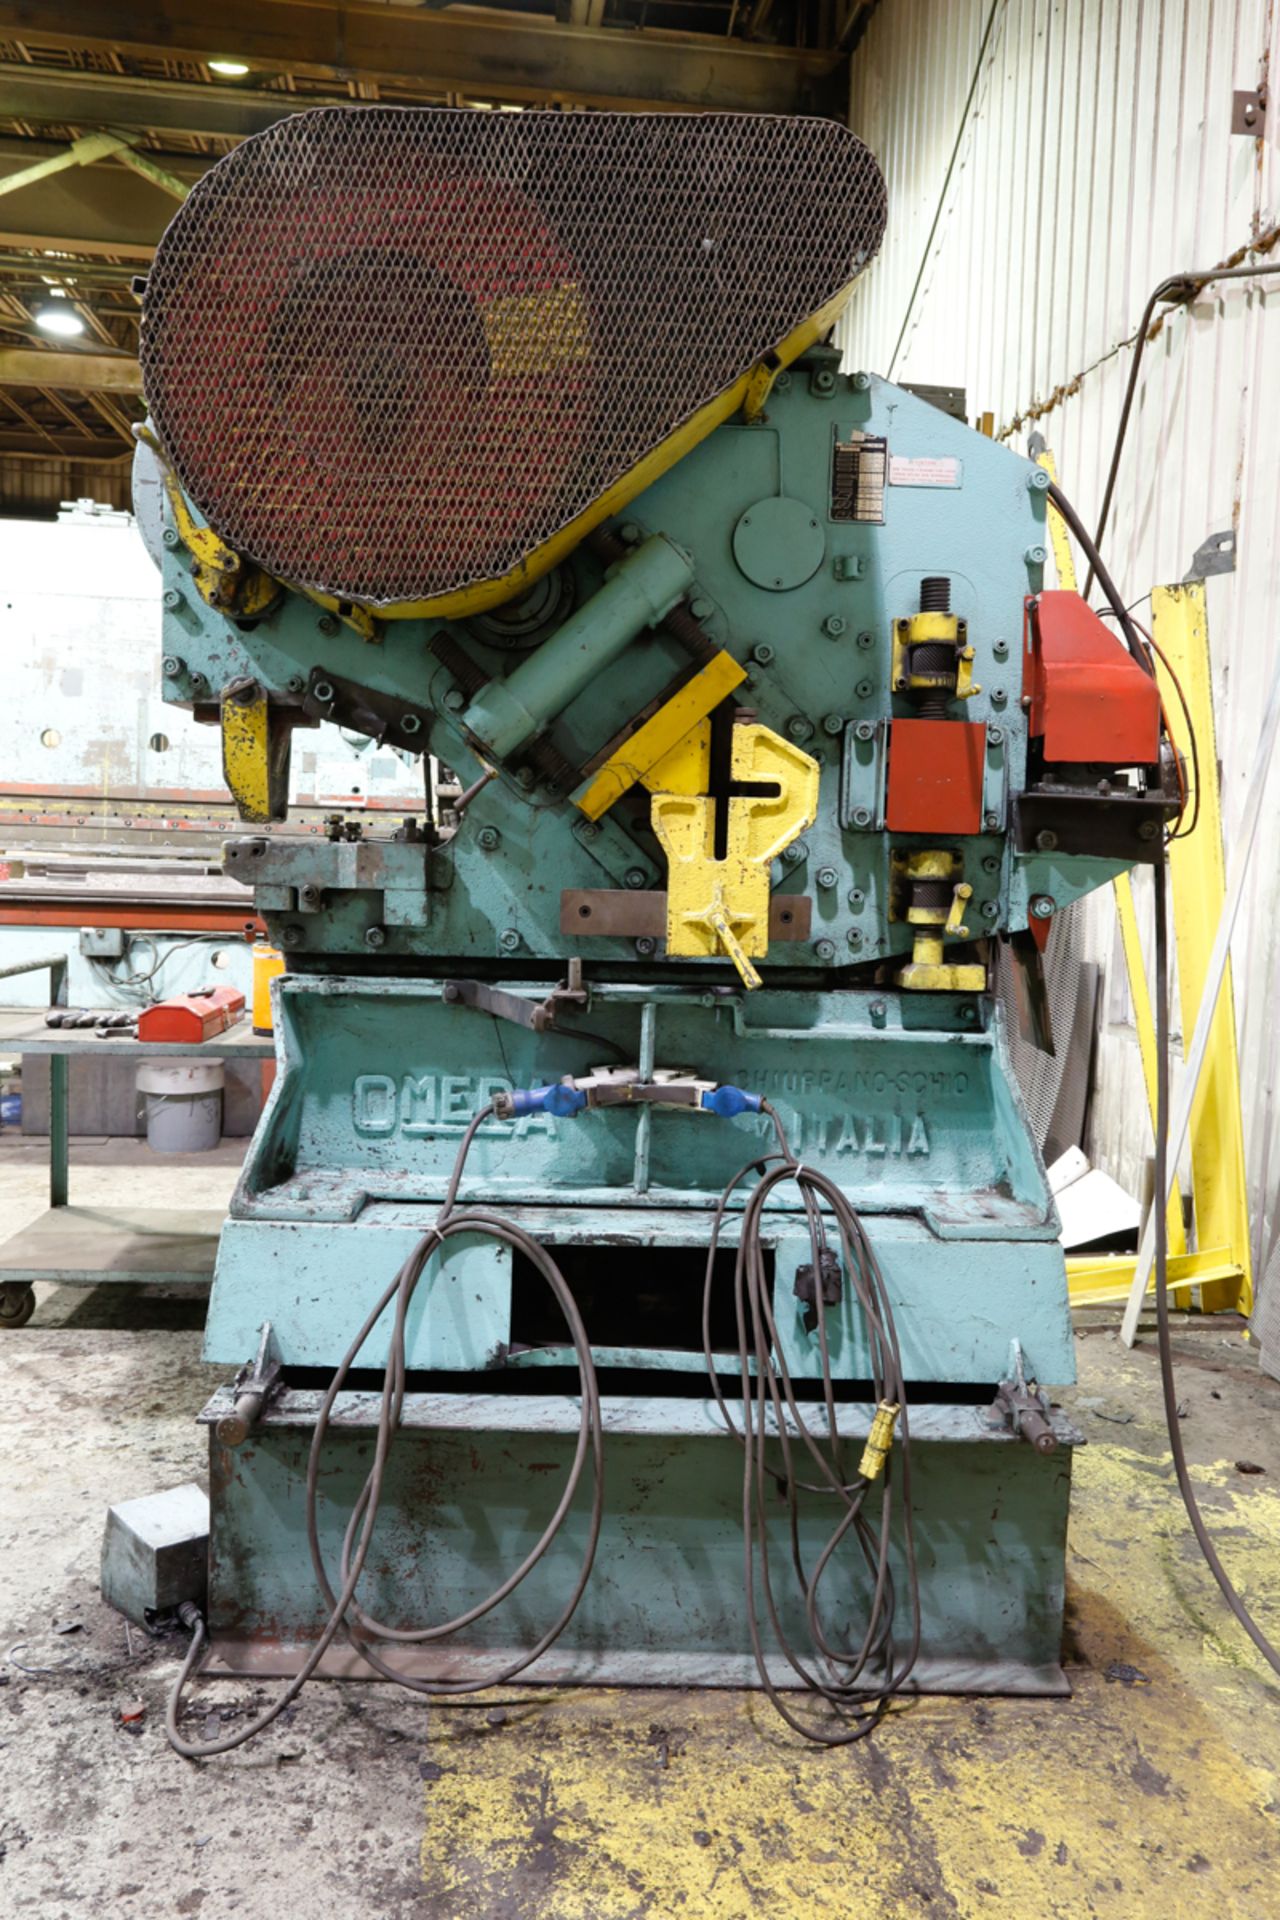 OMERA MULTIMATIC 16-70 MECHANICAL IRONWORKER, 5-1/2 X 5-1/2 X 1/2 CAP., PUNCH UP TO 1-1/8" DIA. W/ - Image 2 of 5